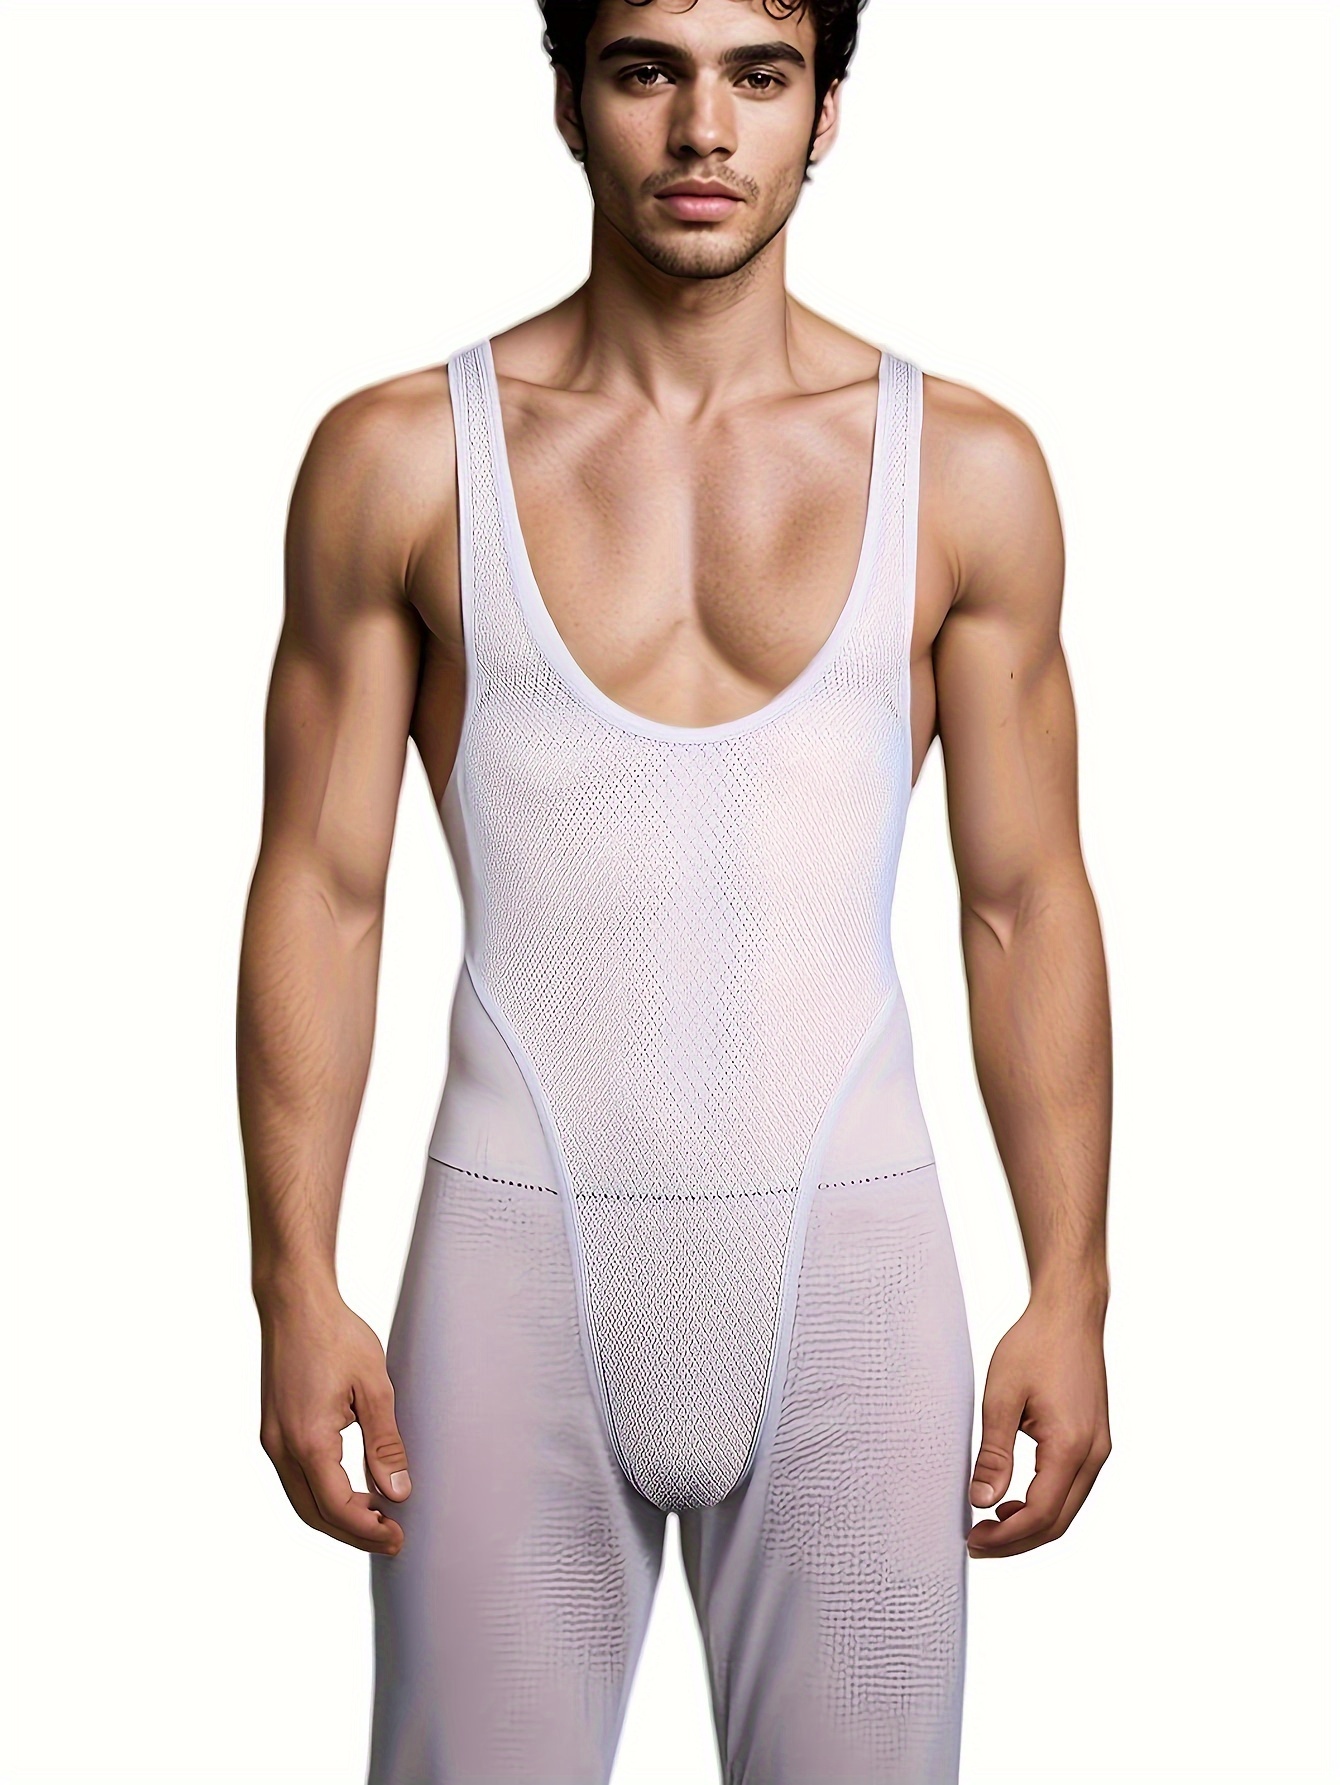 Fashion Mens Transparent Mesh Bodysuit Novelty Camouflage Printing Splice  Jumpsuit Sexy Male Bondage Lingerie Underwear214A From Ai808, $19.28